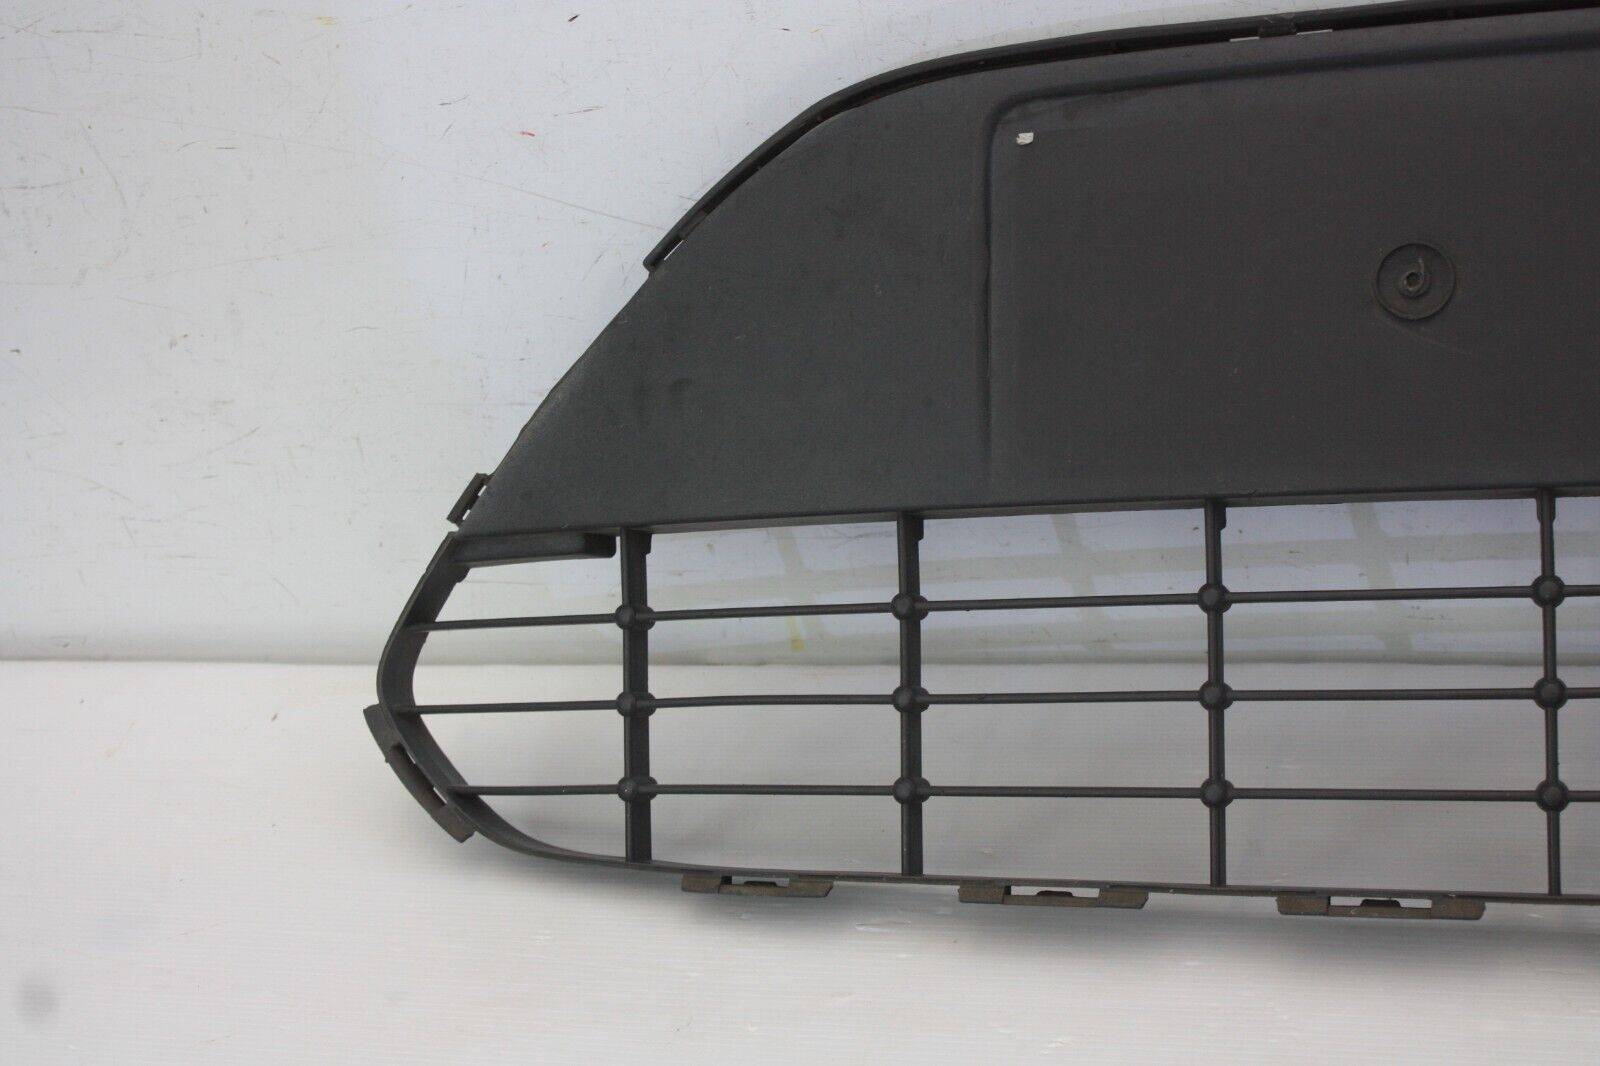 Ford-Focus-Front-Bumper-Grill-2008-TO-2011-8M51-17B968-BE-Genuine-SEE-PICS-175622452576-5